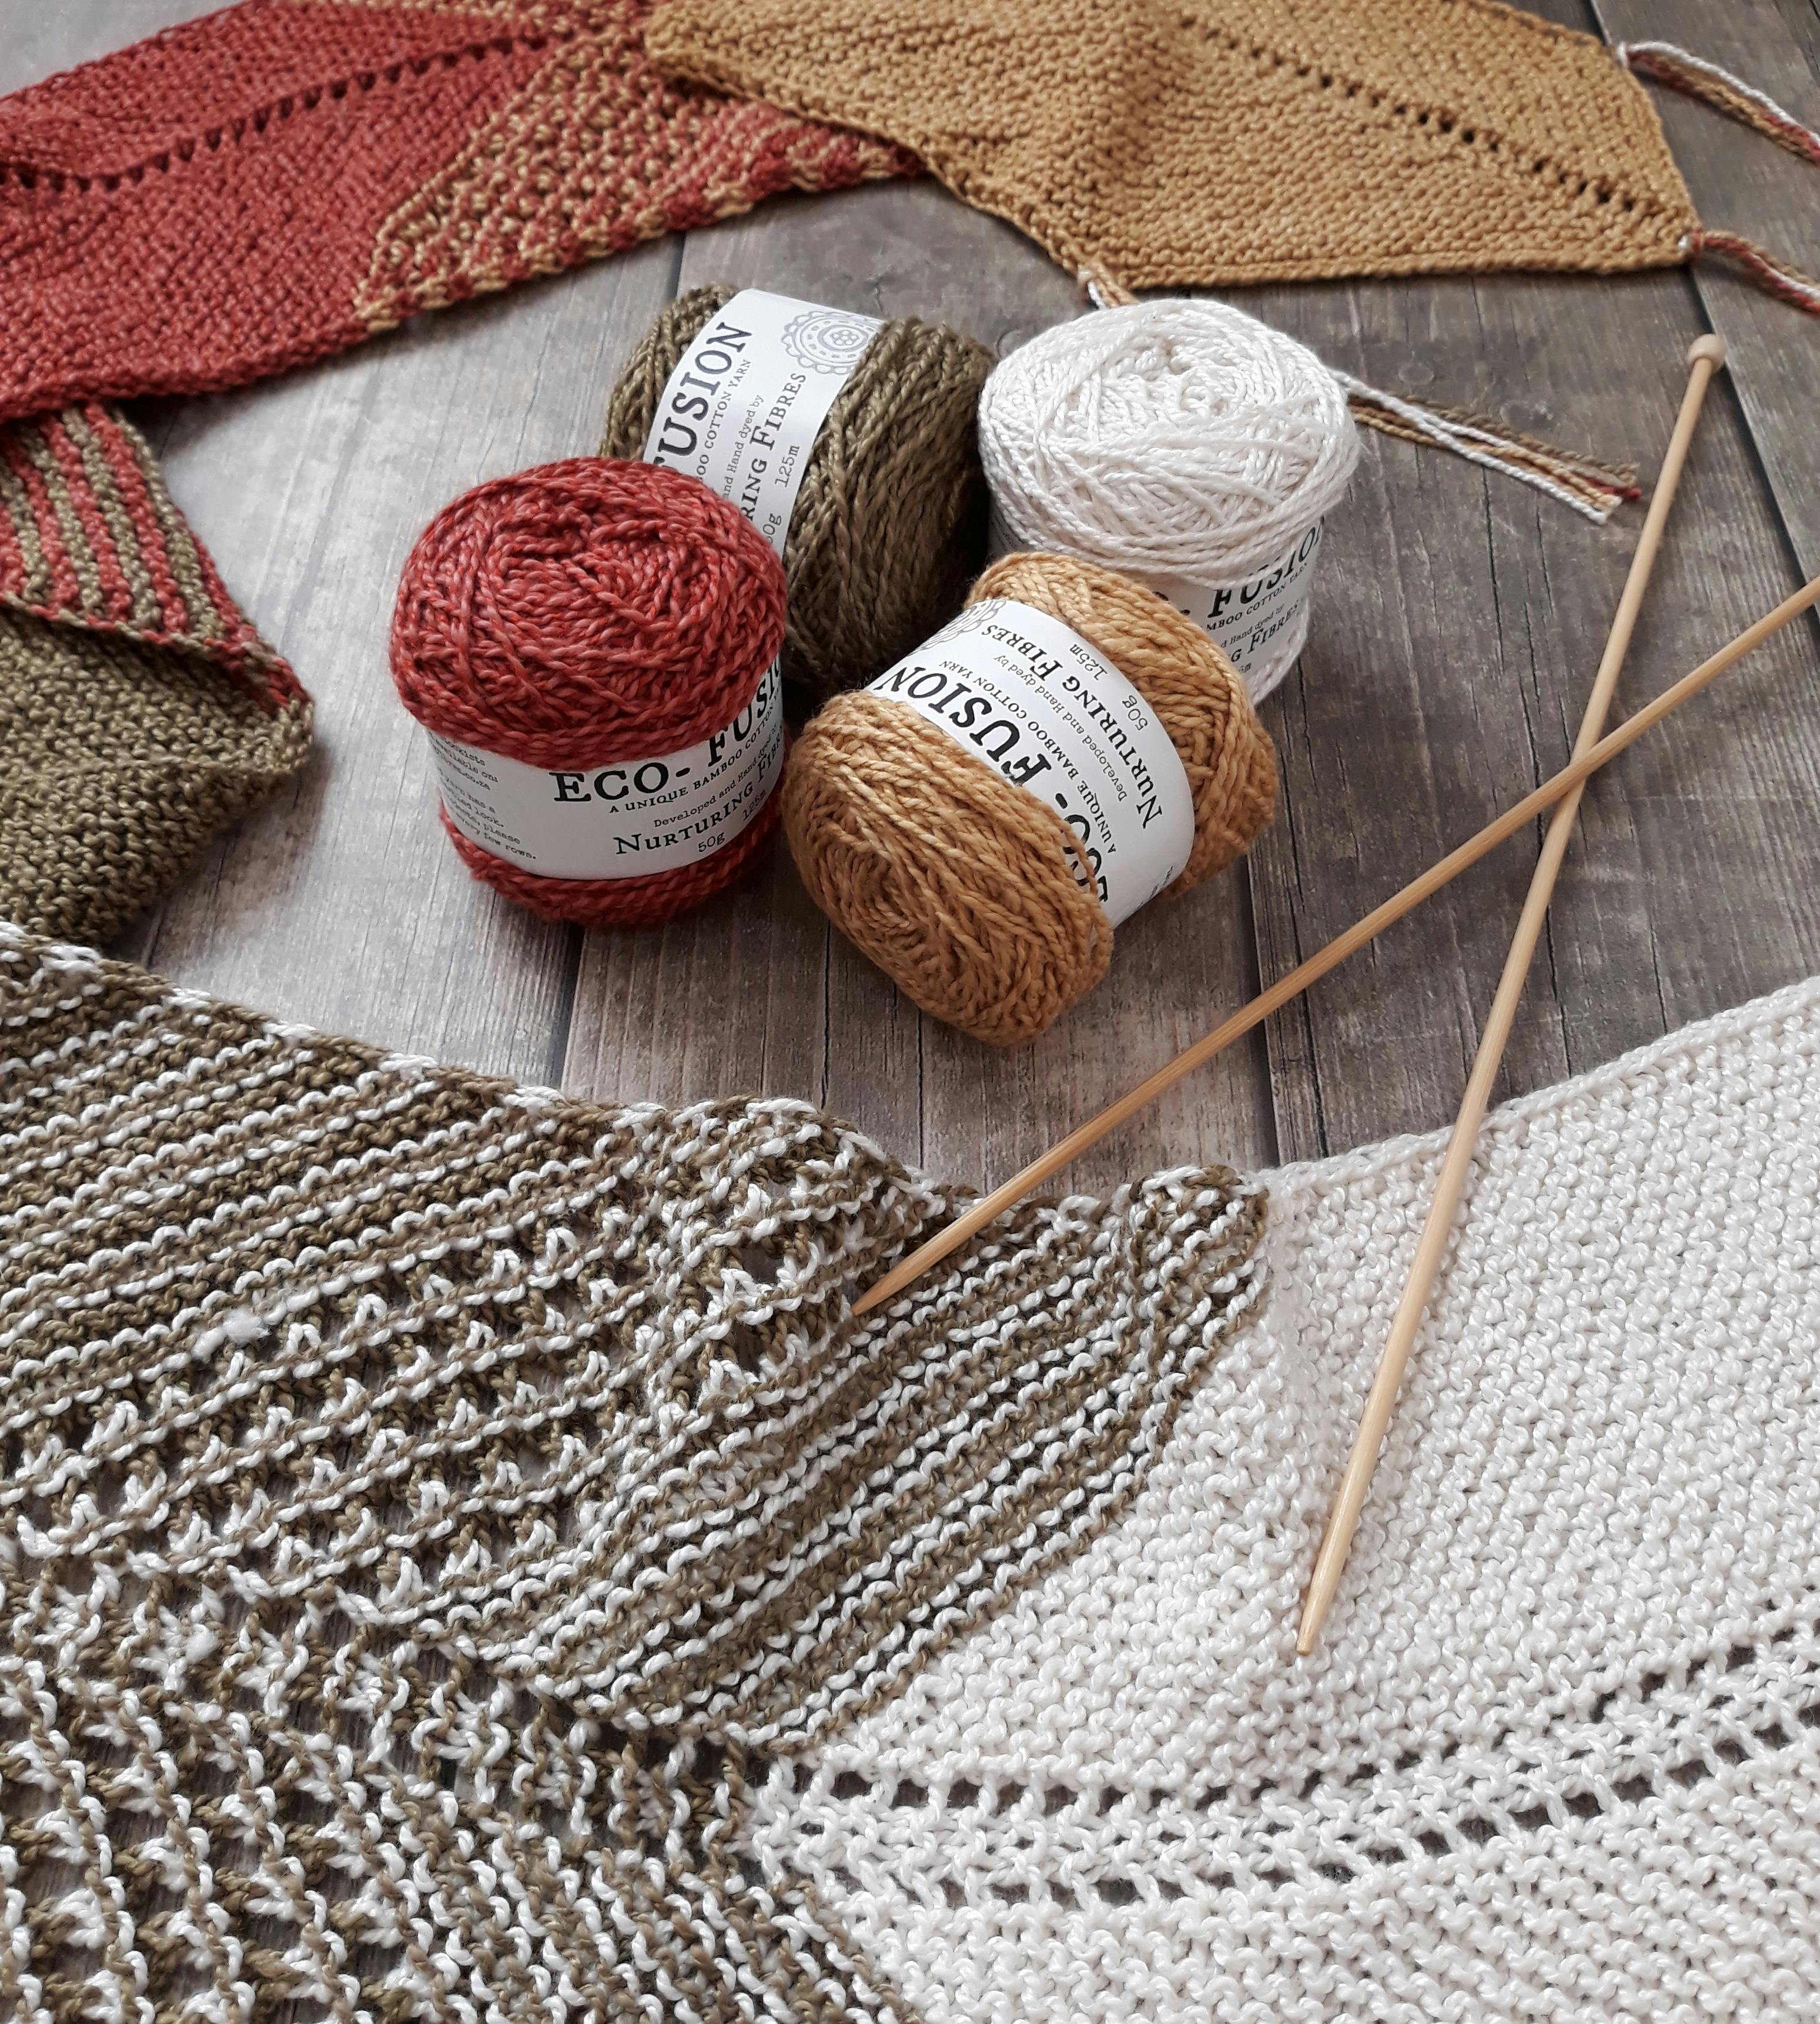 Yarn Photos, Download The BEST Free Yarn Stock Photos & HD Images